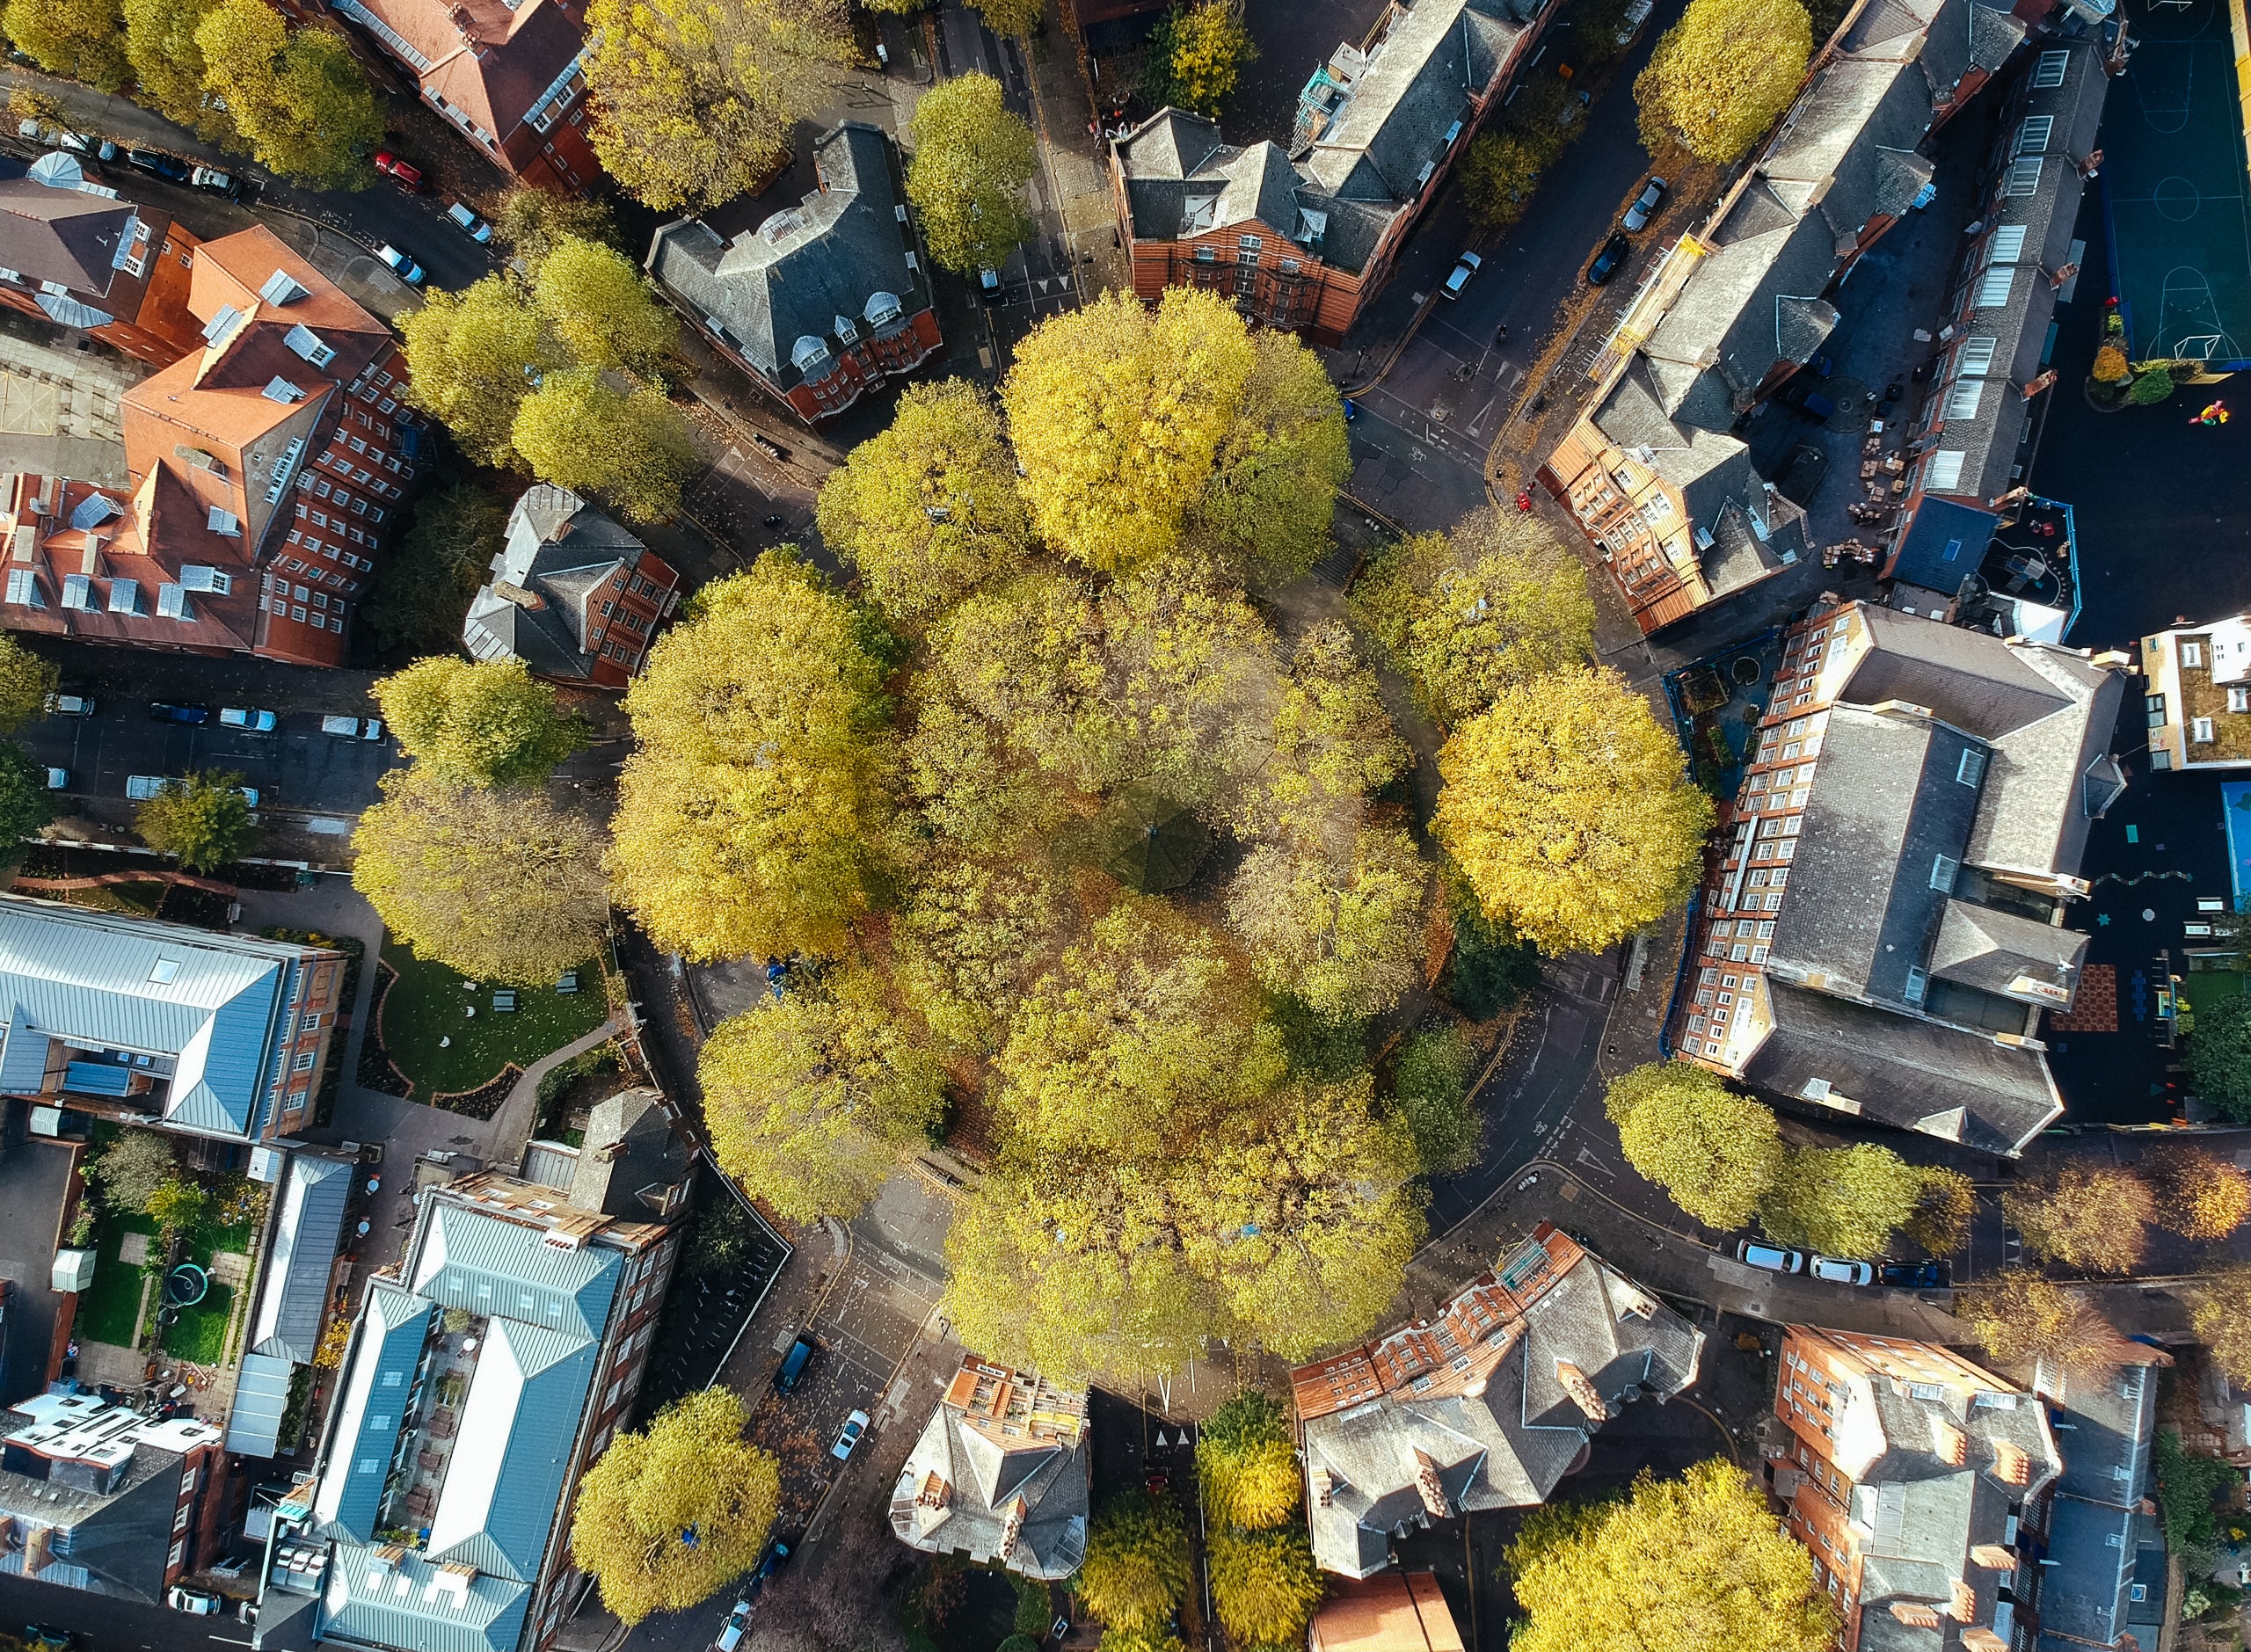 Aerial image of trees in a city.